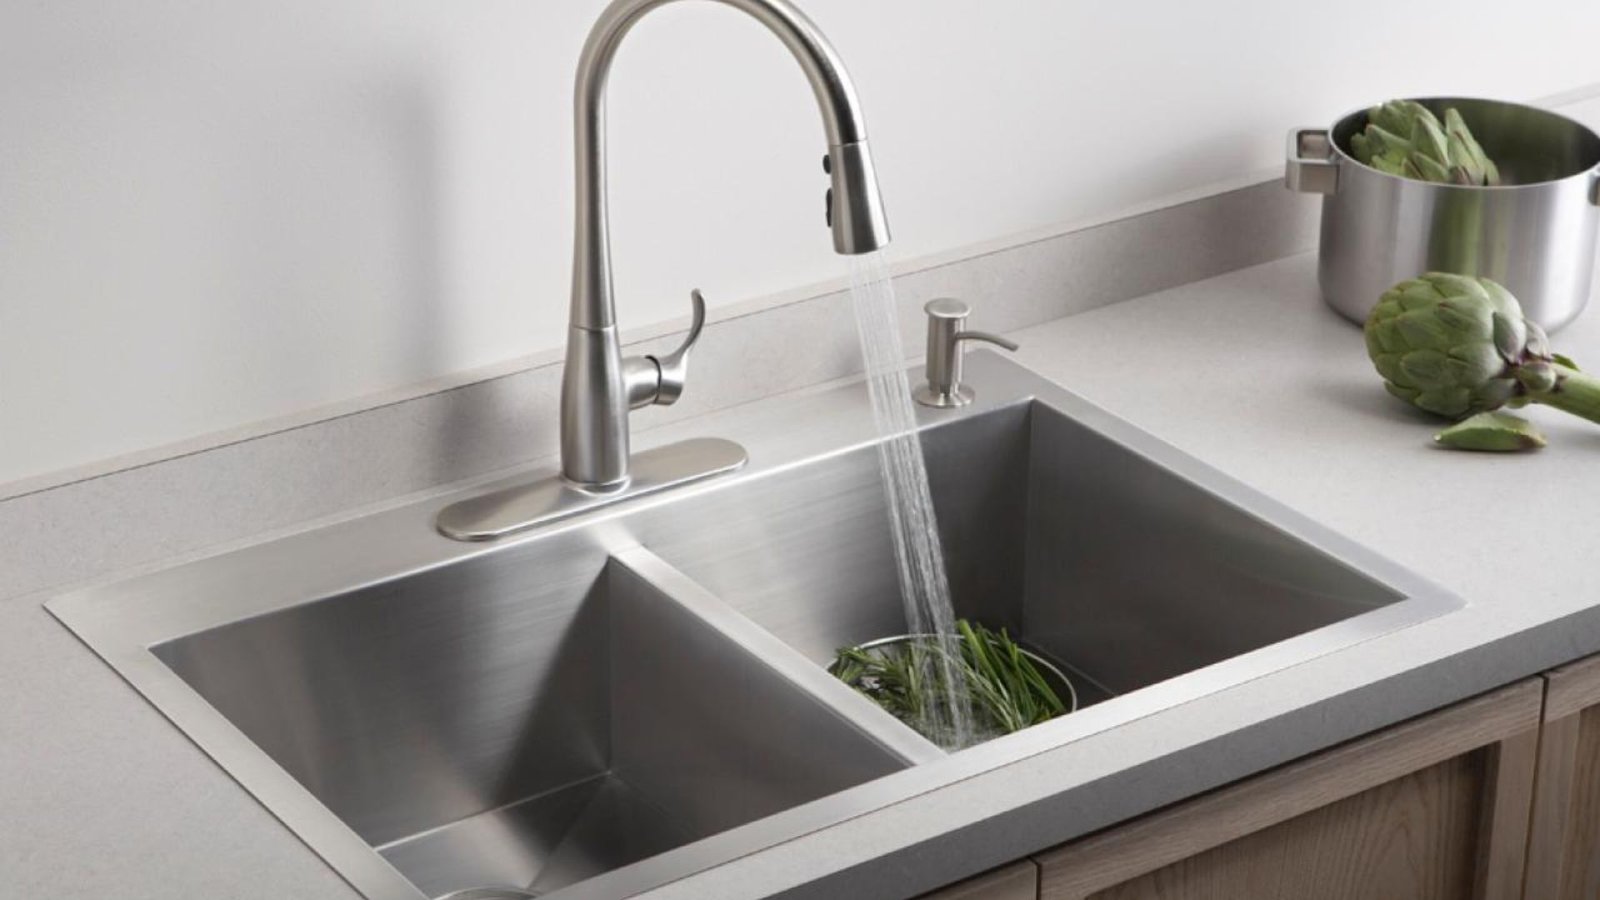 Pеrfеct-Kitchеn-Sink-Mixеr-for-Your-Homе